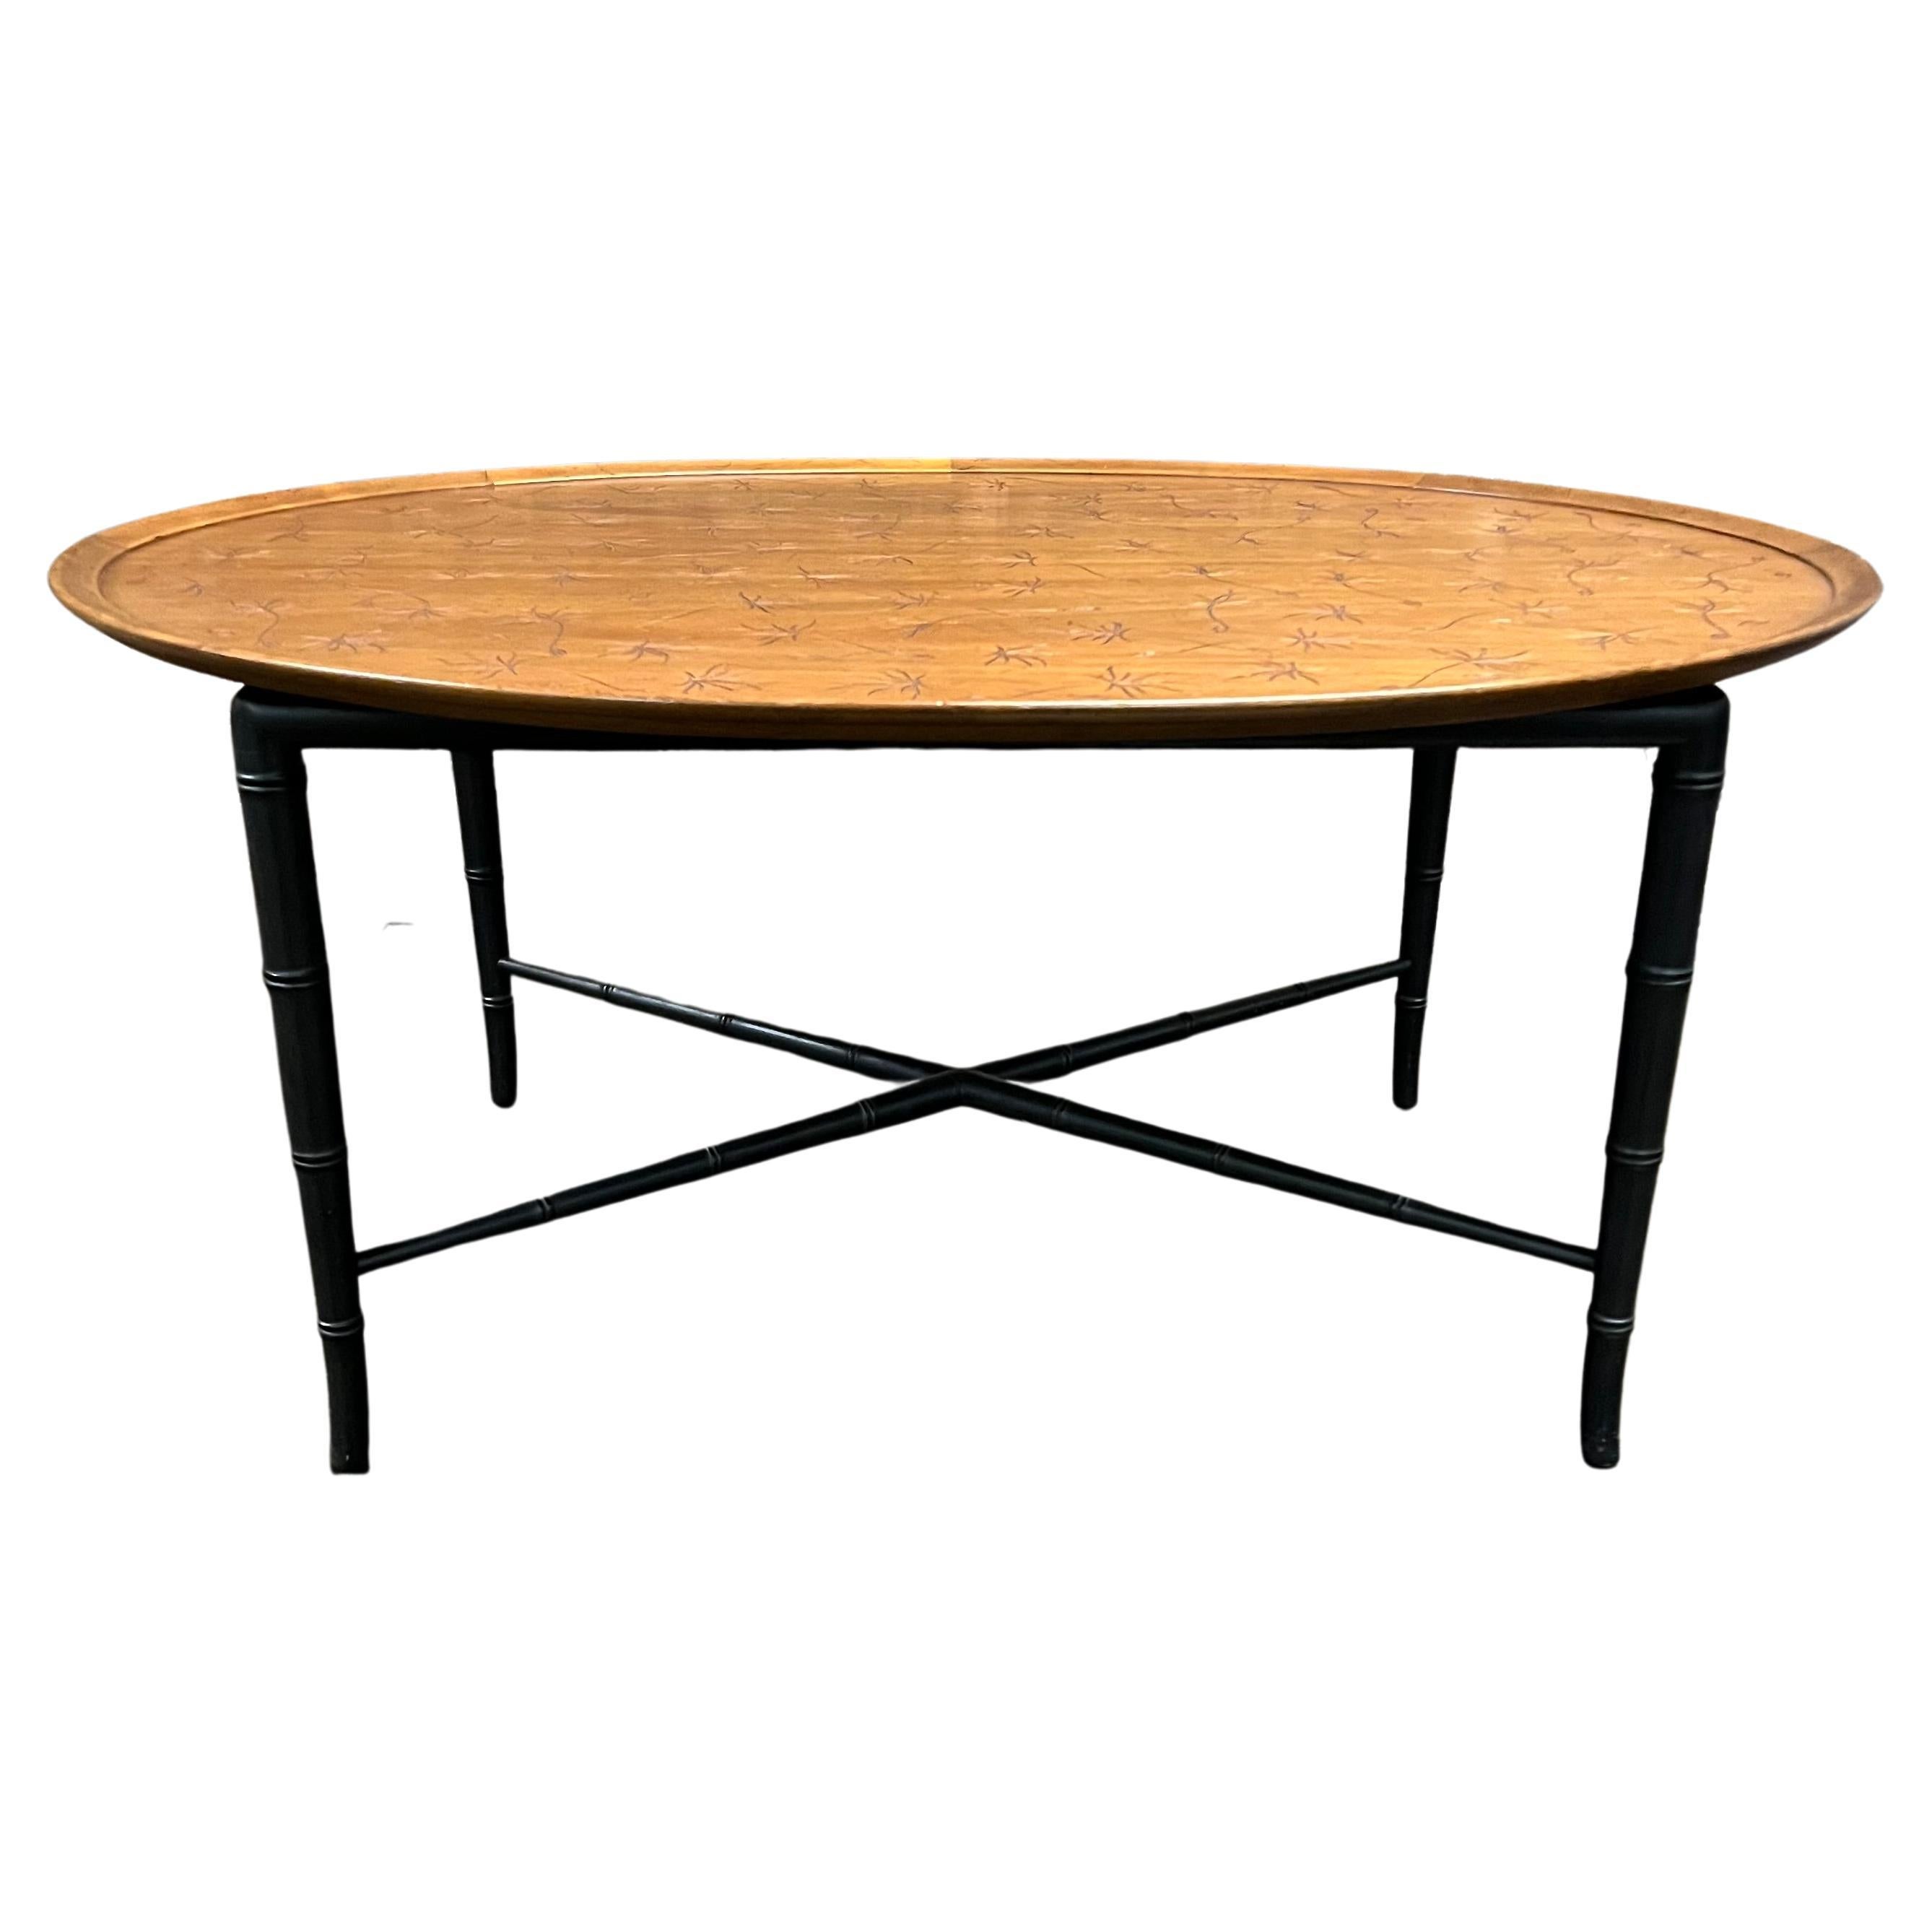 Kittinger Midcentury Oval Coffee Table with Incised Design on Faux Bamboo Base For Sale